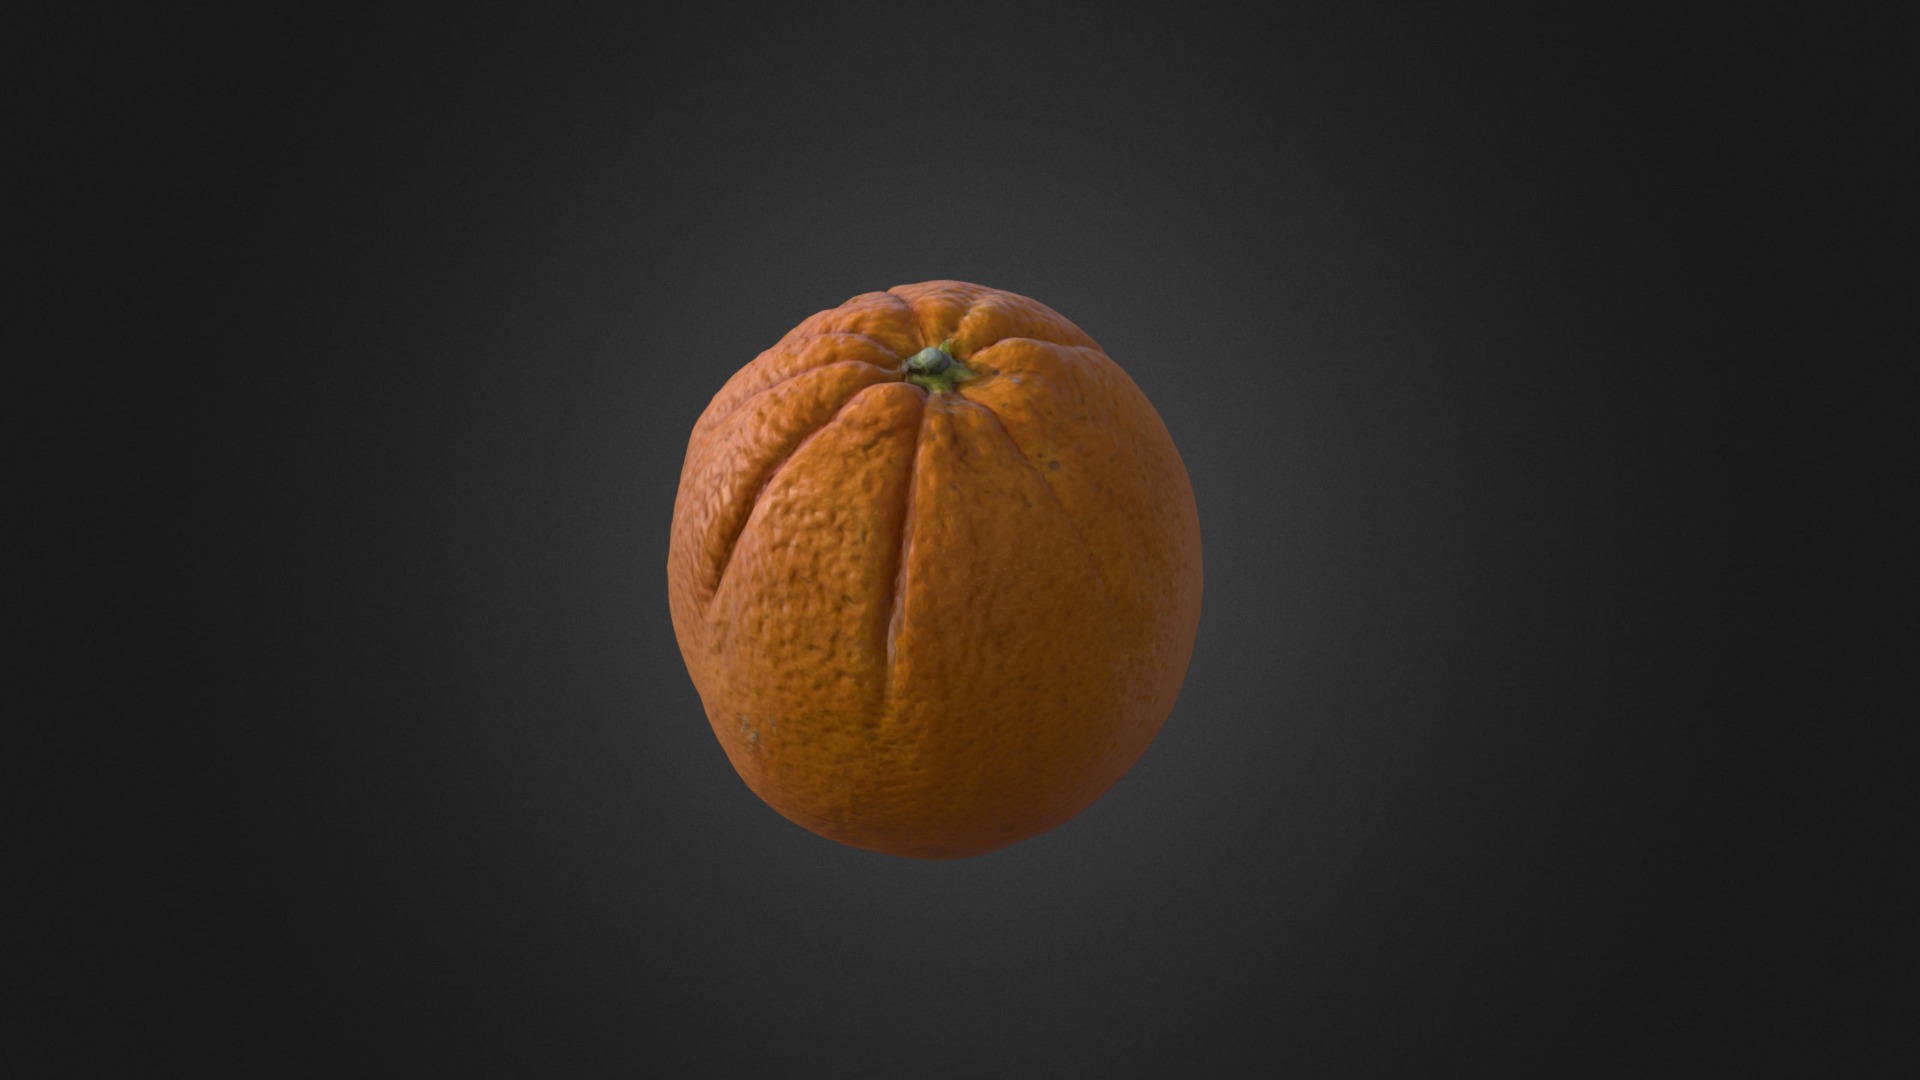 3D model Orange - This is a 3D model of the Orange. The 3D model is about an orange with a green stem.